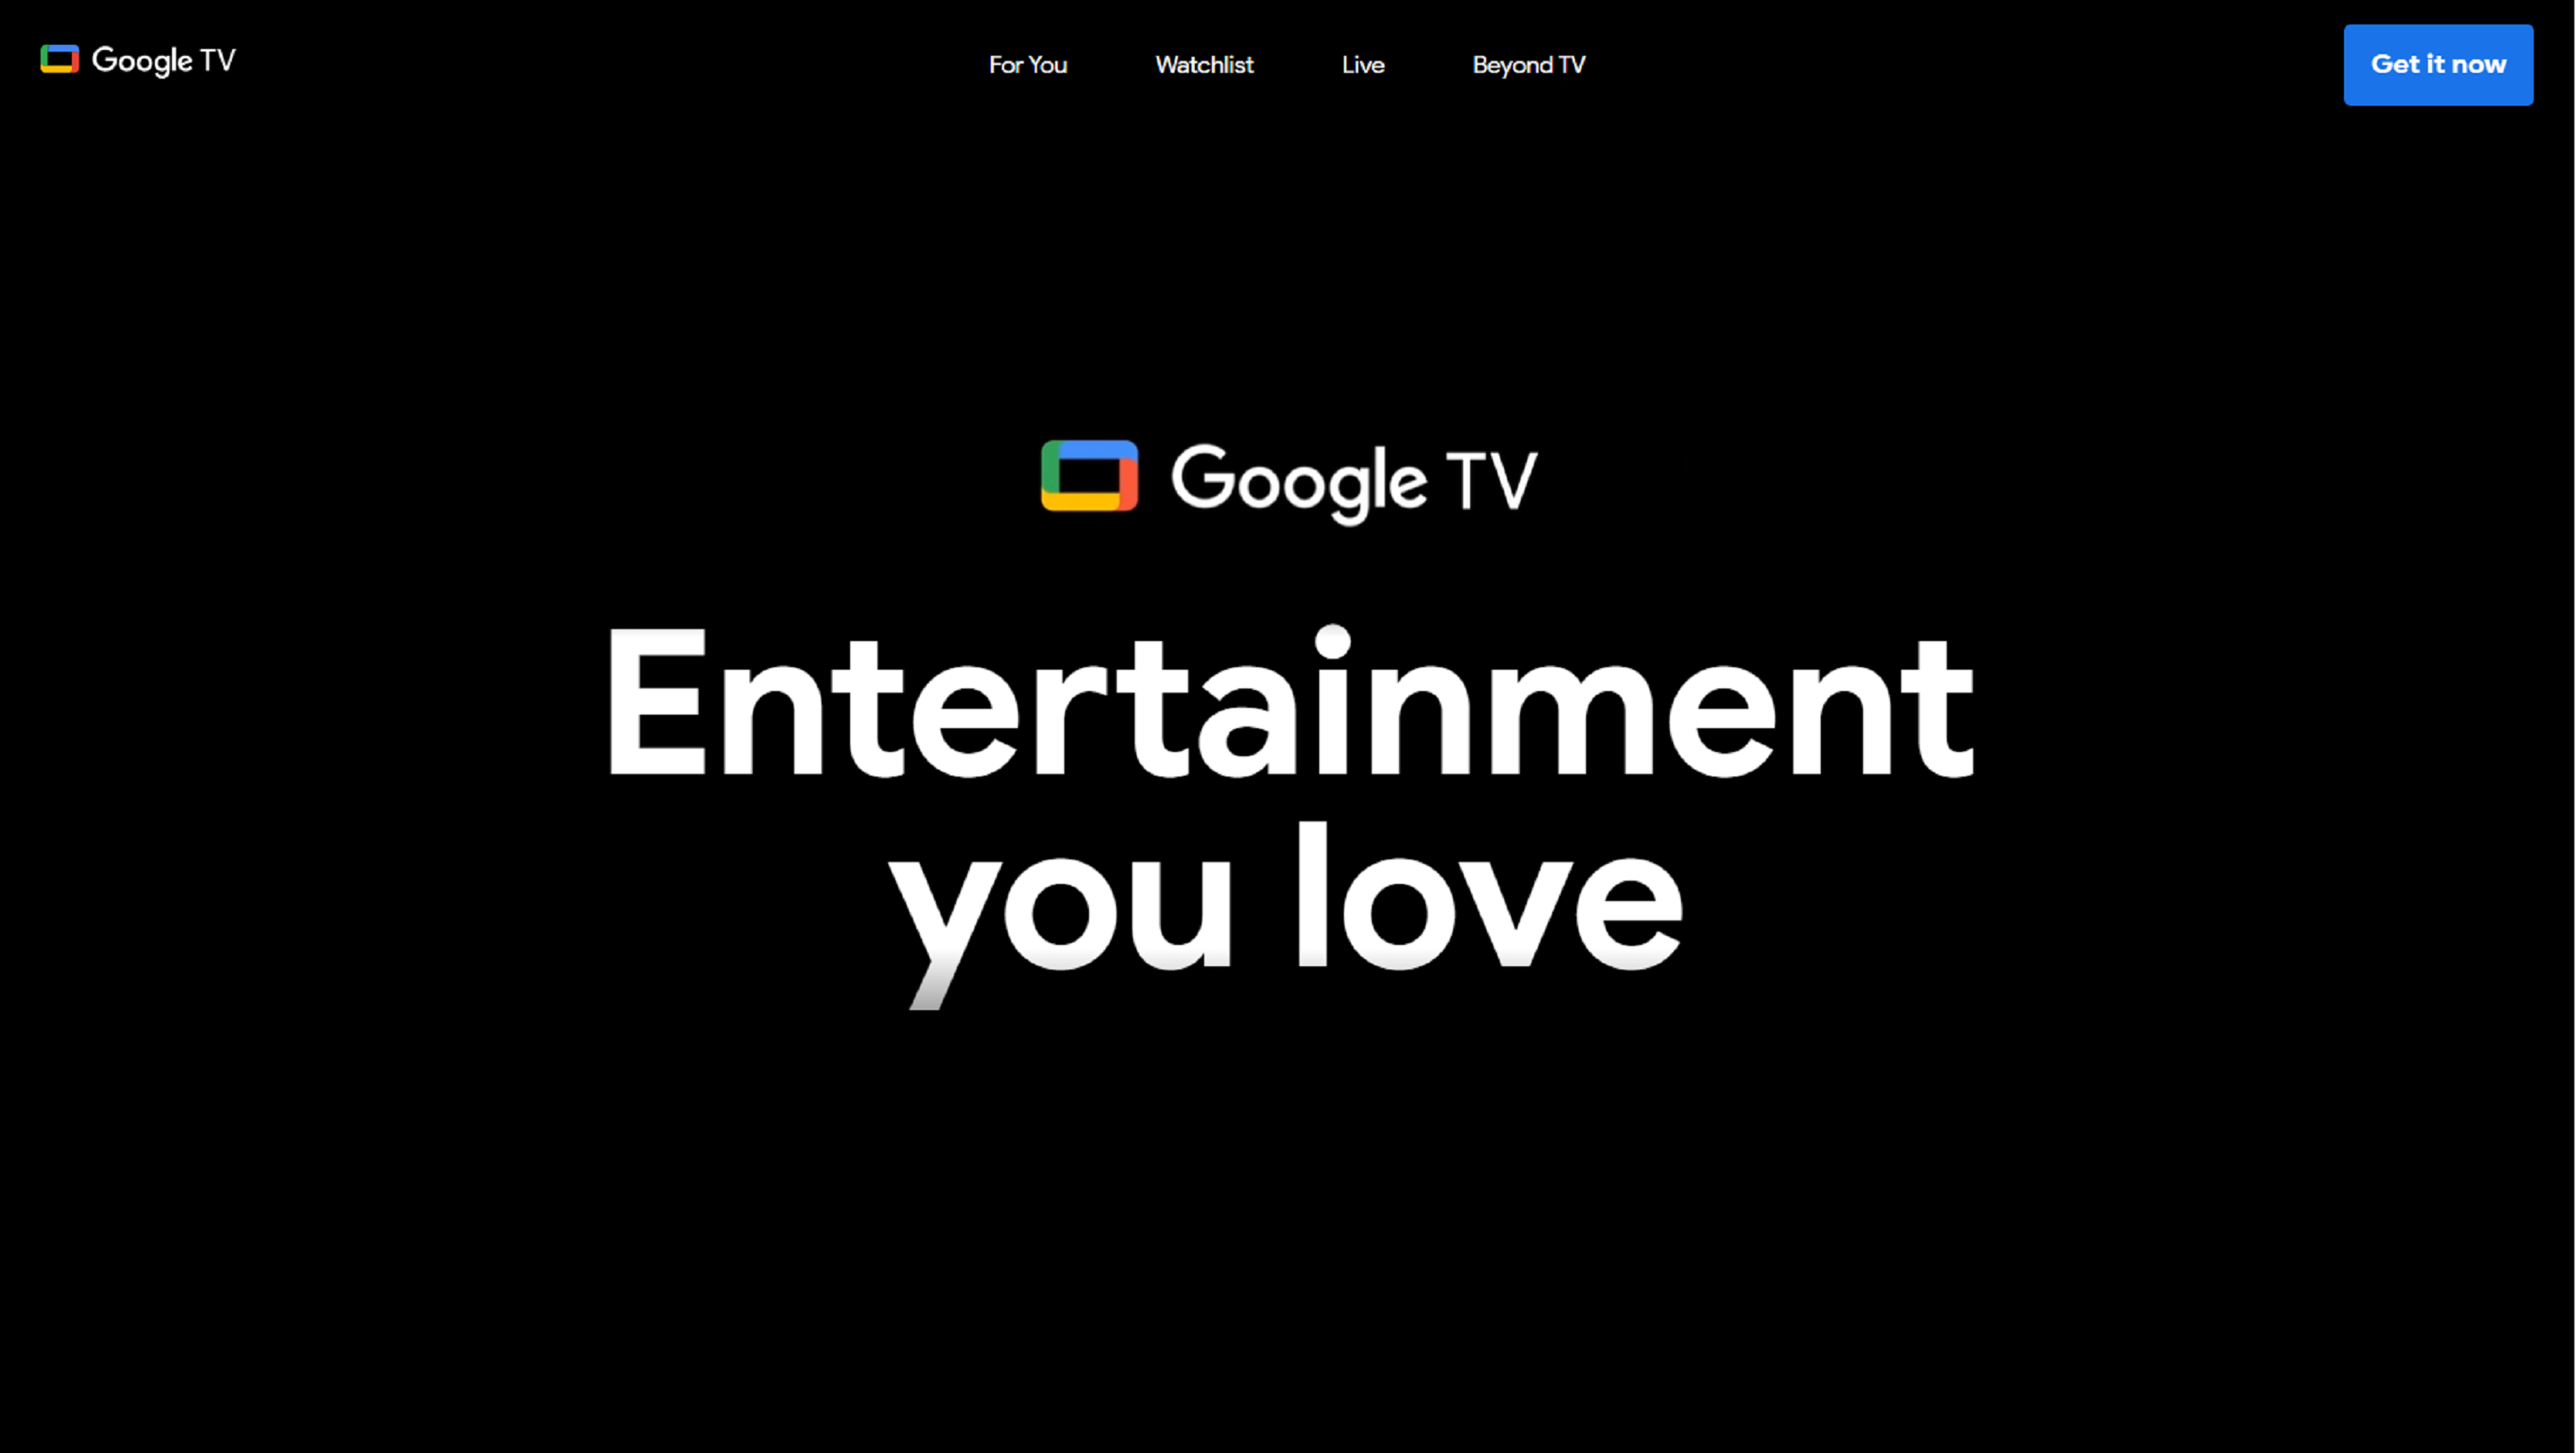 Google goes big with the launch of Google TV on a .brand